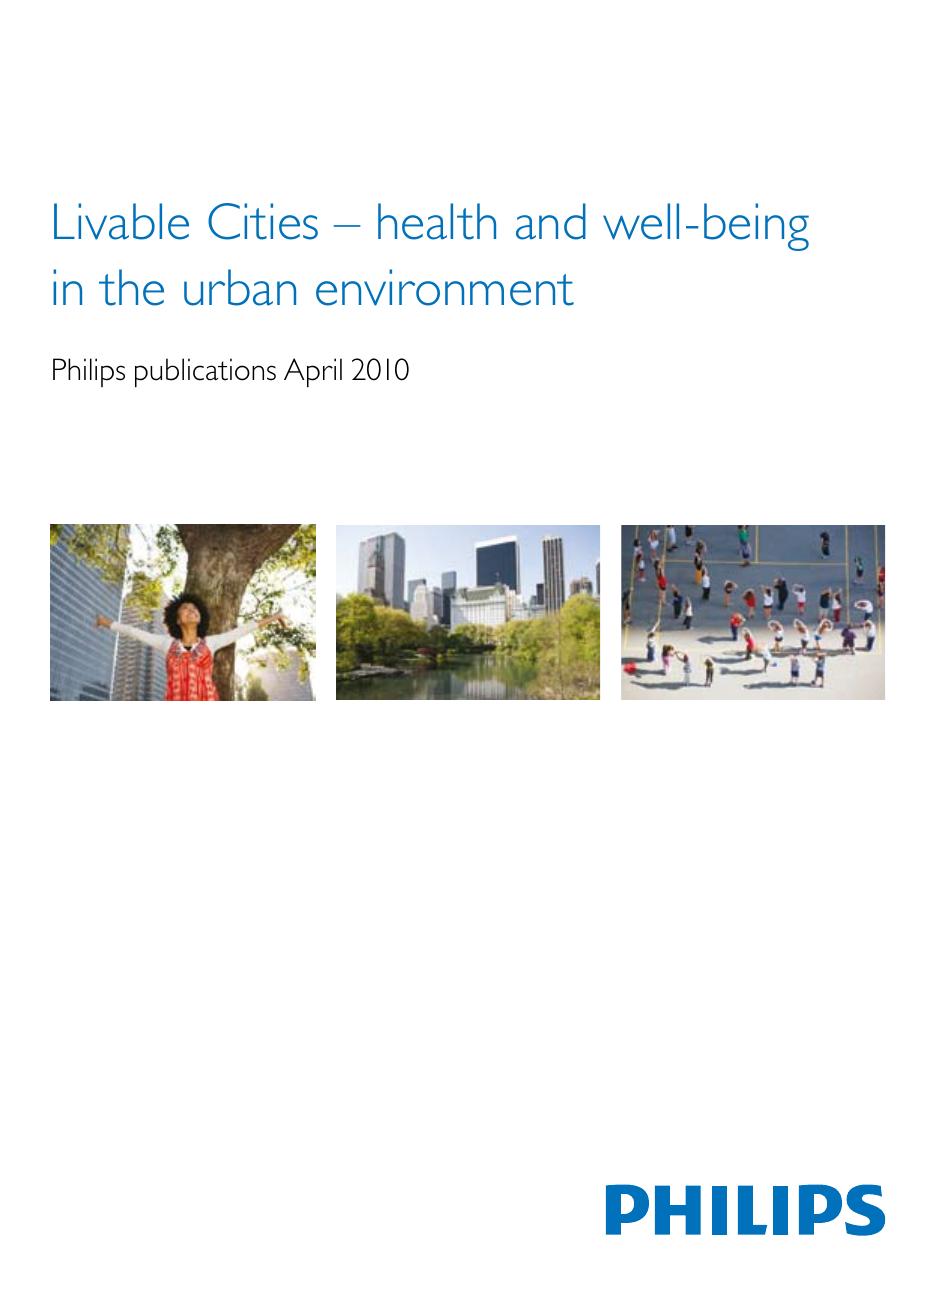 Livable Cities – health and well-being. 2010